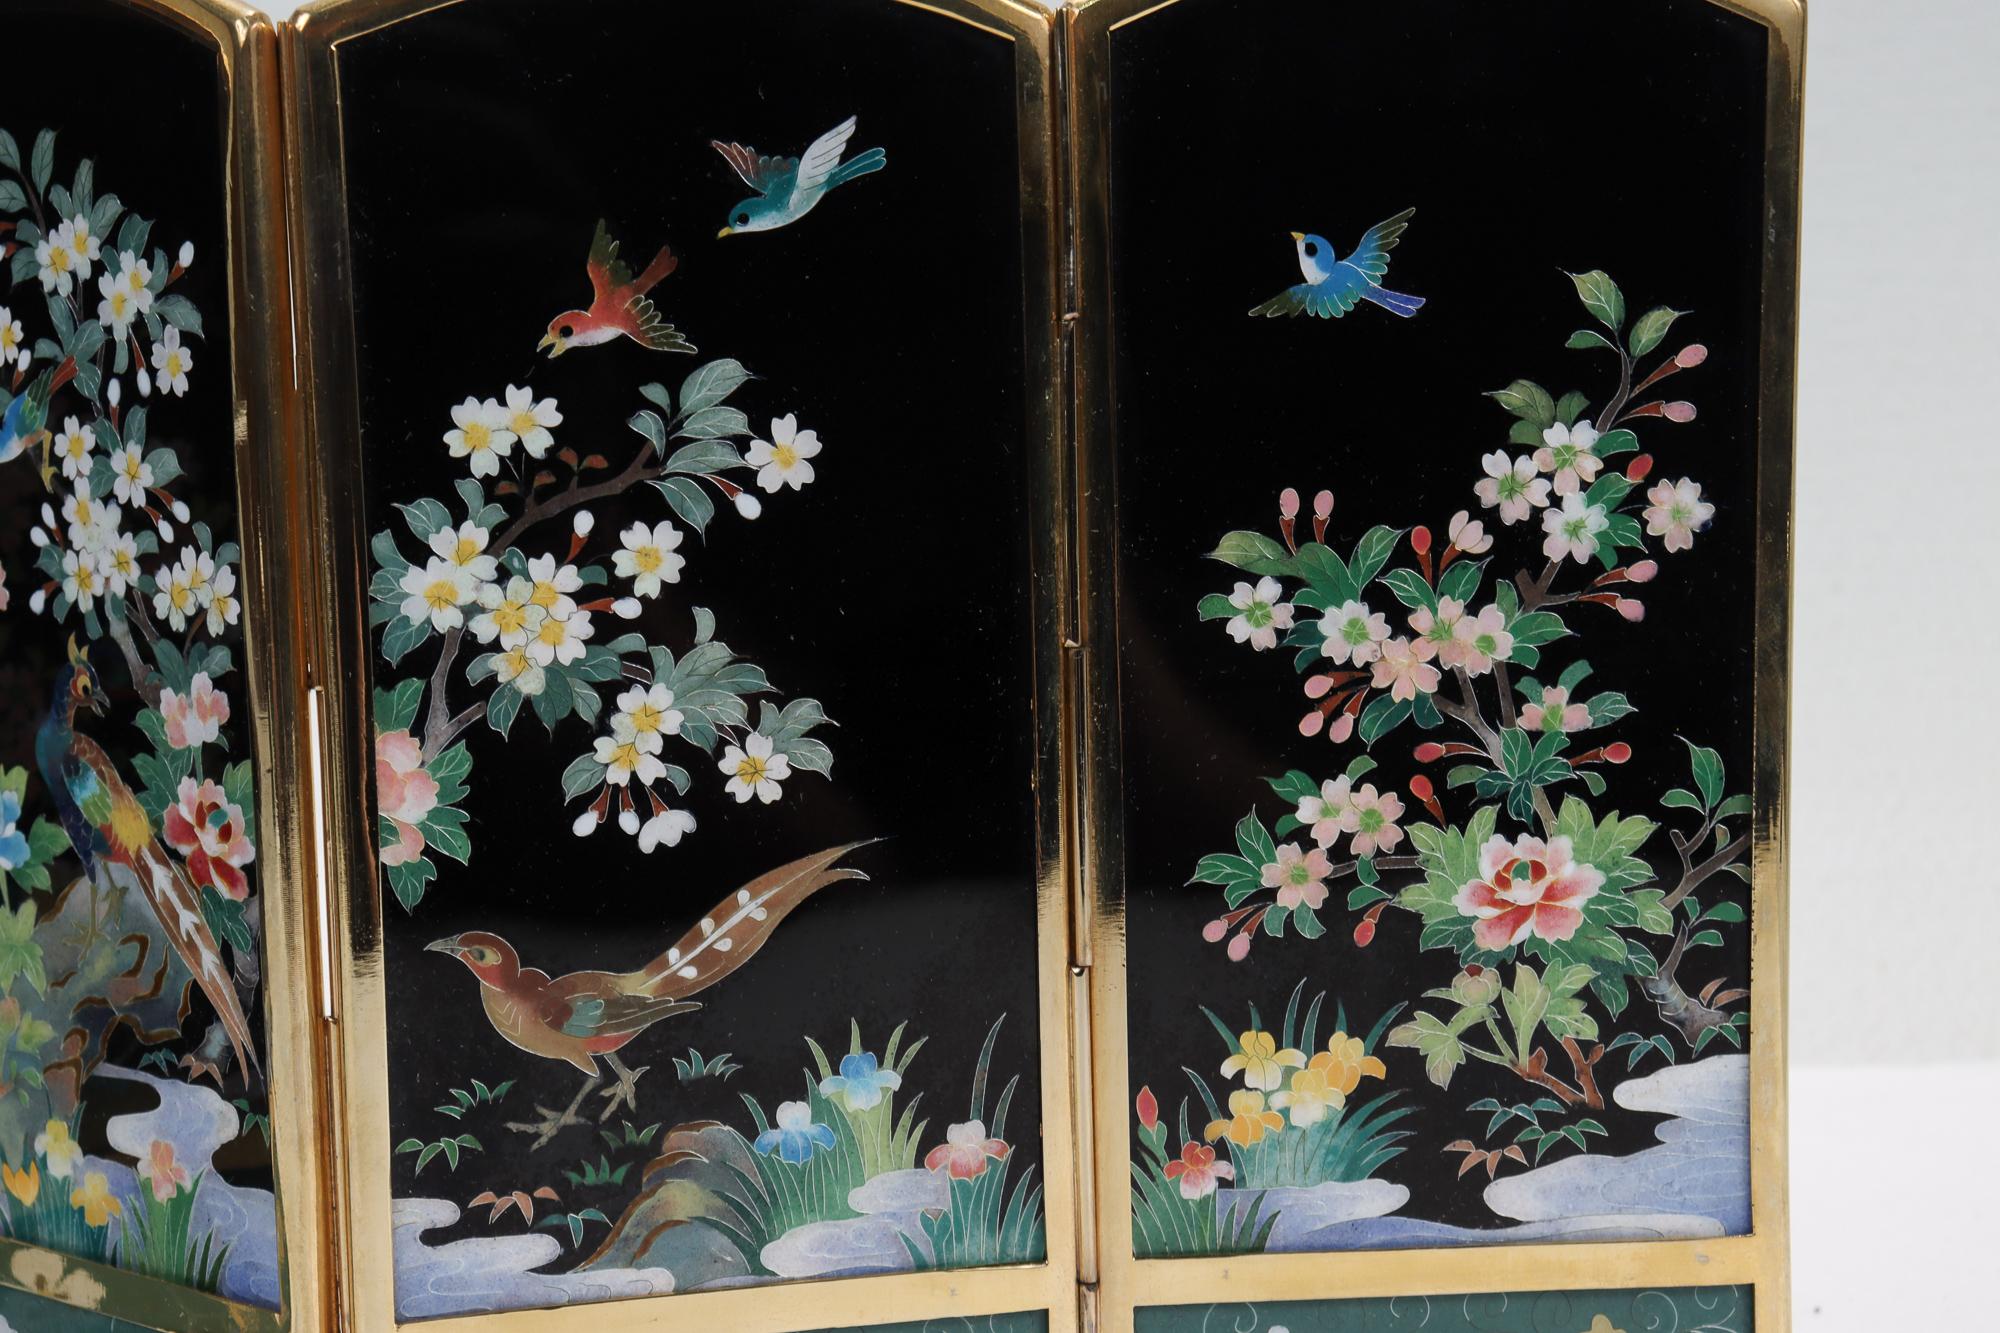 20th Century Old or Antique Japanese Inaba Cloisonne Table Screen with Birds & Flowers